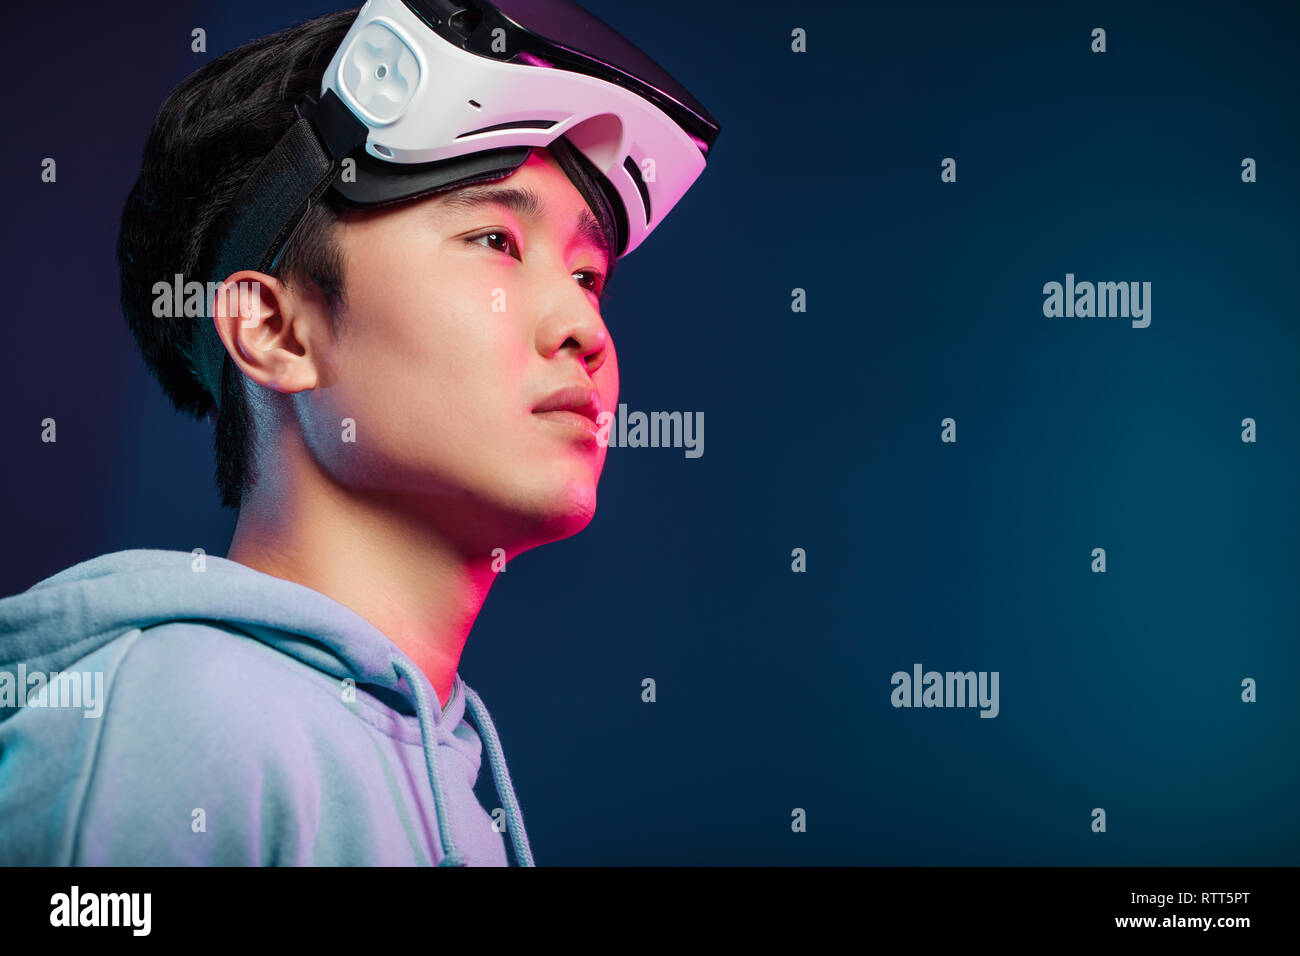 Successful Asian male virtual reality gamer taking off vr headset and looking around at studio, isolated portrait over dark blue background with doubl Stock Photo